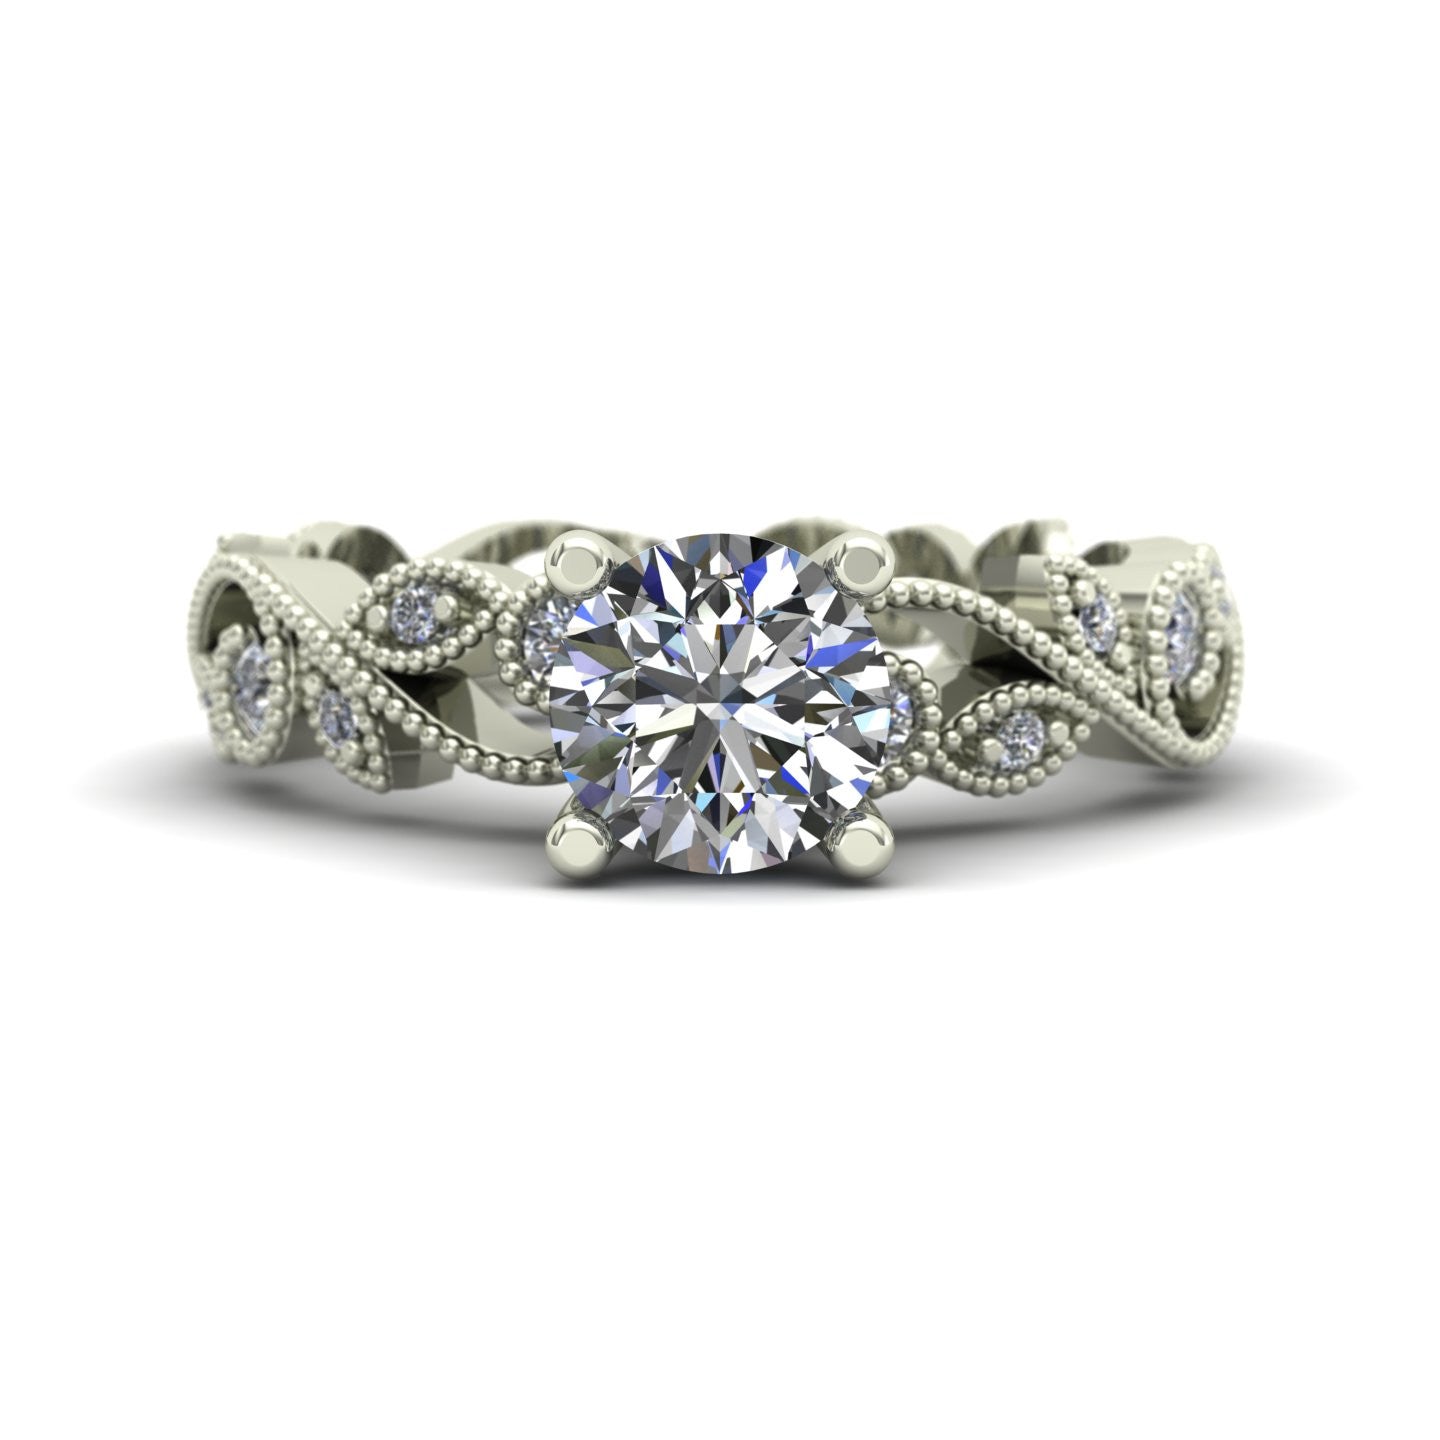 three quarter carat diamond solitaire floral engagement ring in 14k white gold - Charles Babb Designs - top view